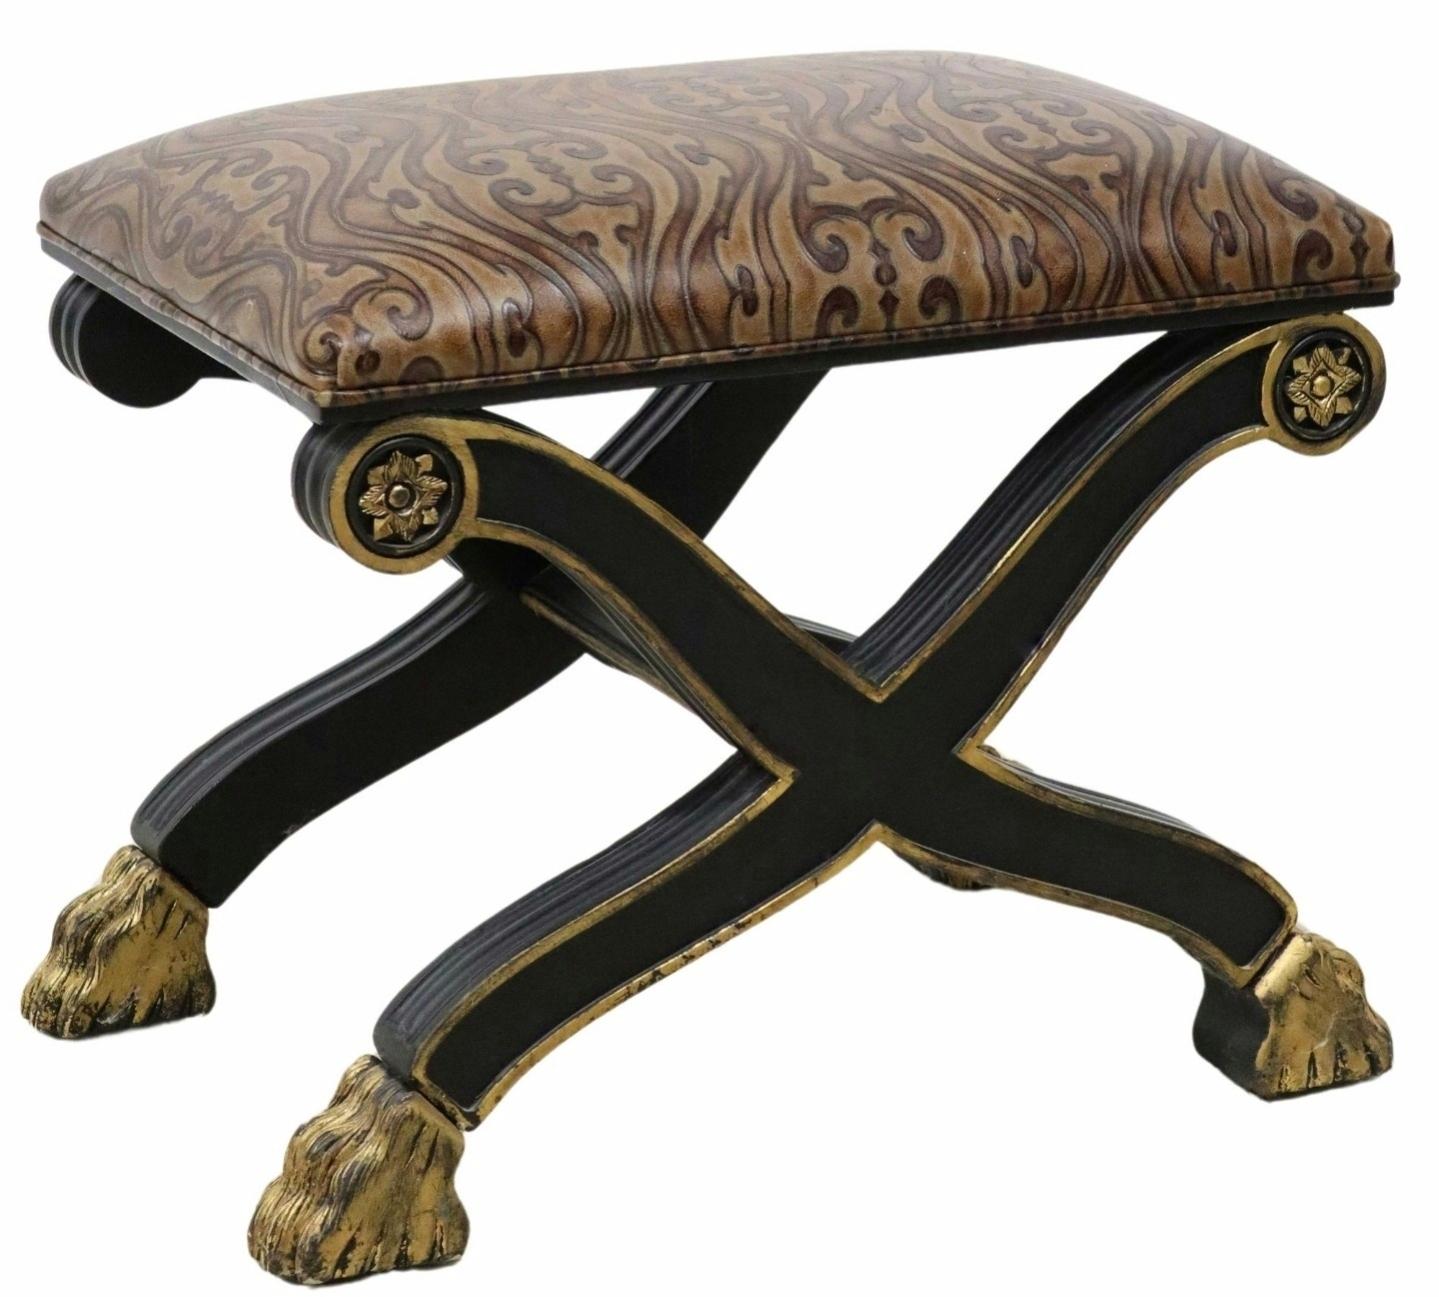 A stunning Neoclassical style curule bench by fine quality American furniture maker Century Furniture (est.1947; Hickory, North Carolina, United States)

Exquisitely crafted from select hardwoods, 21st century, the Consulate features a timeless